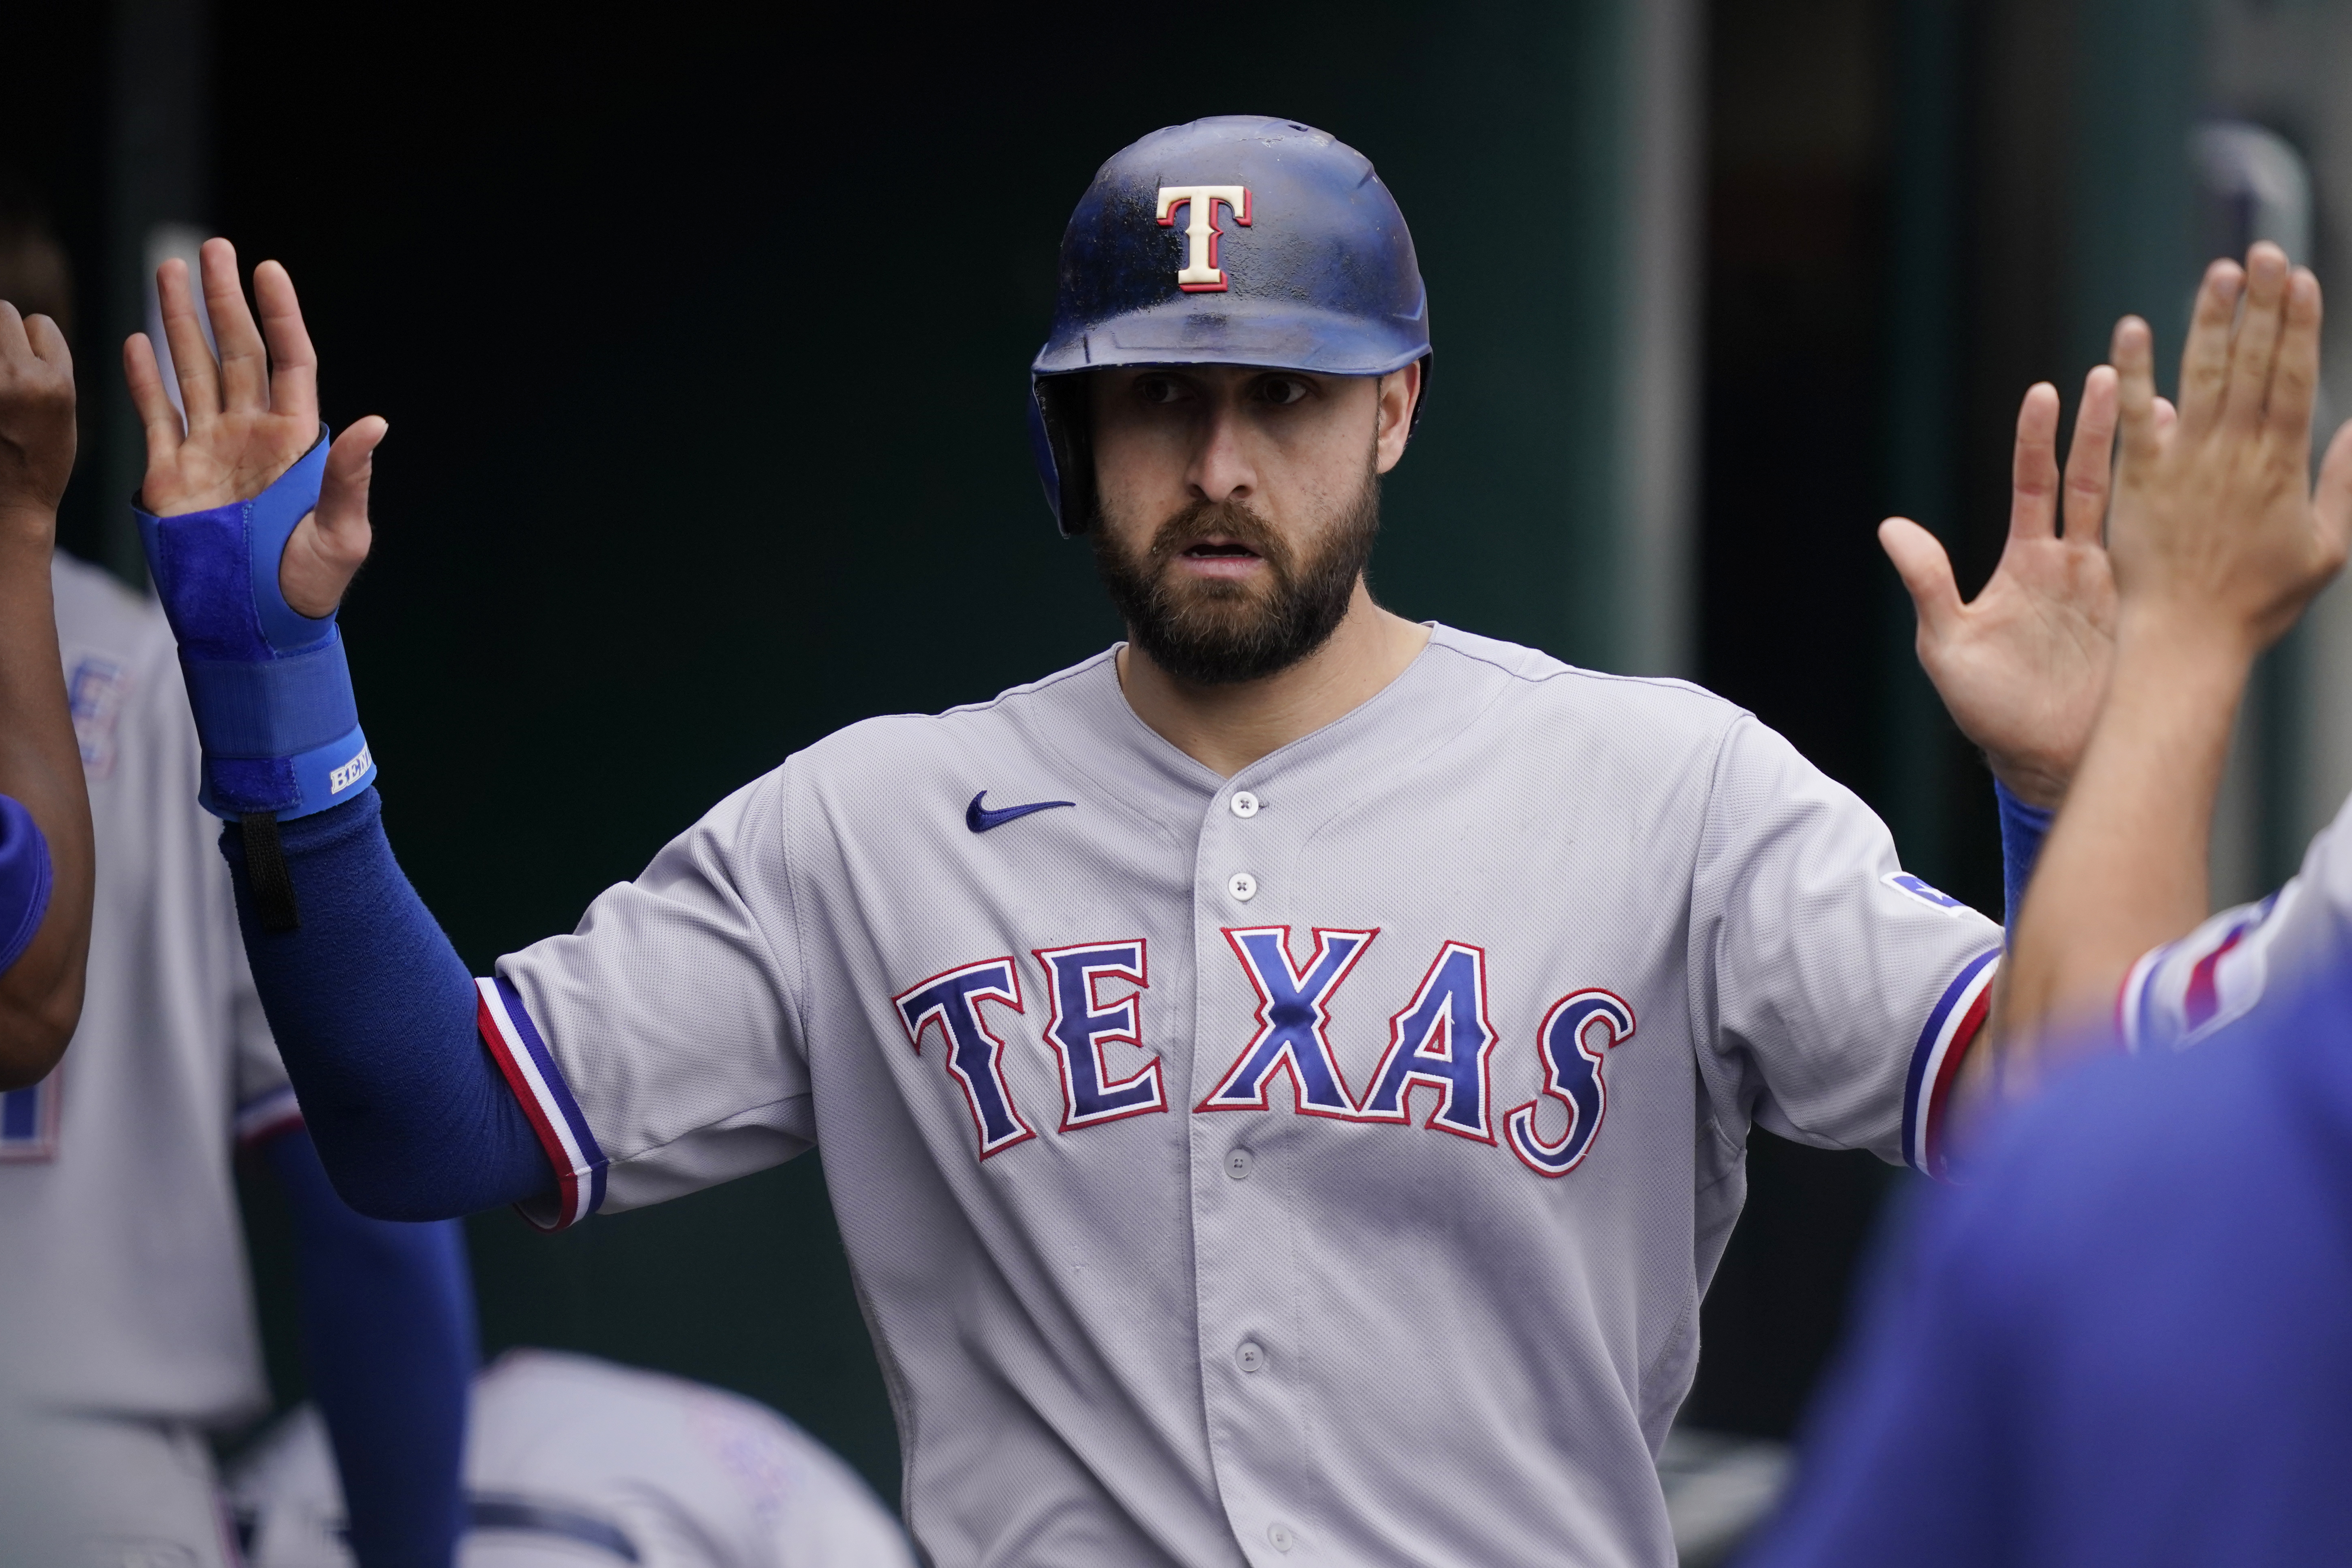 Joey Gallo on his time with Yankees: 'I didn't live up to expectations